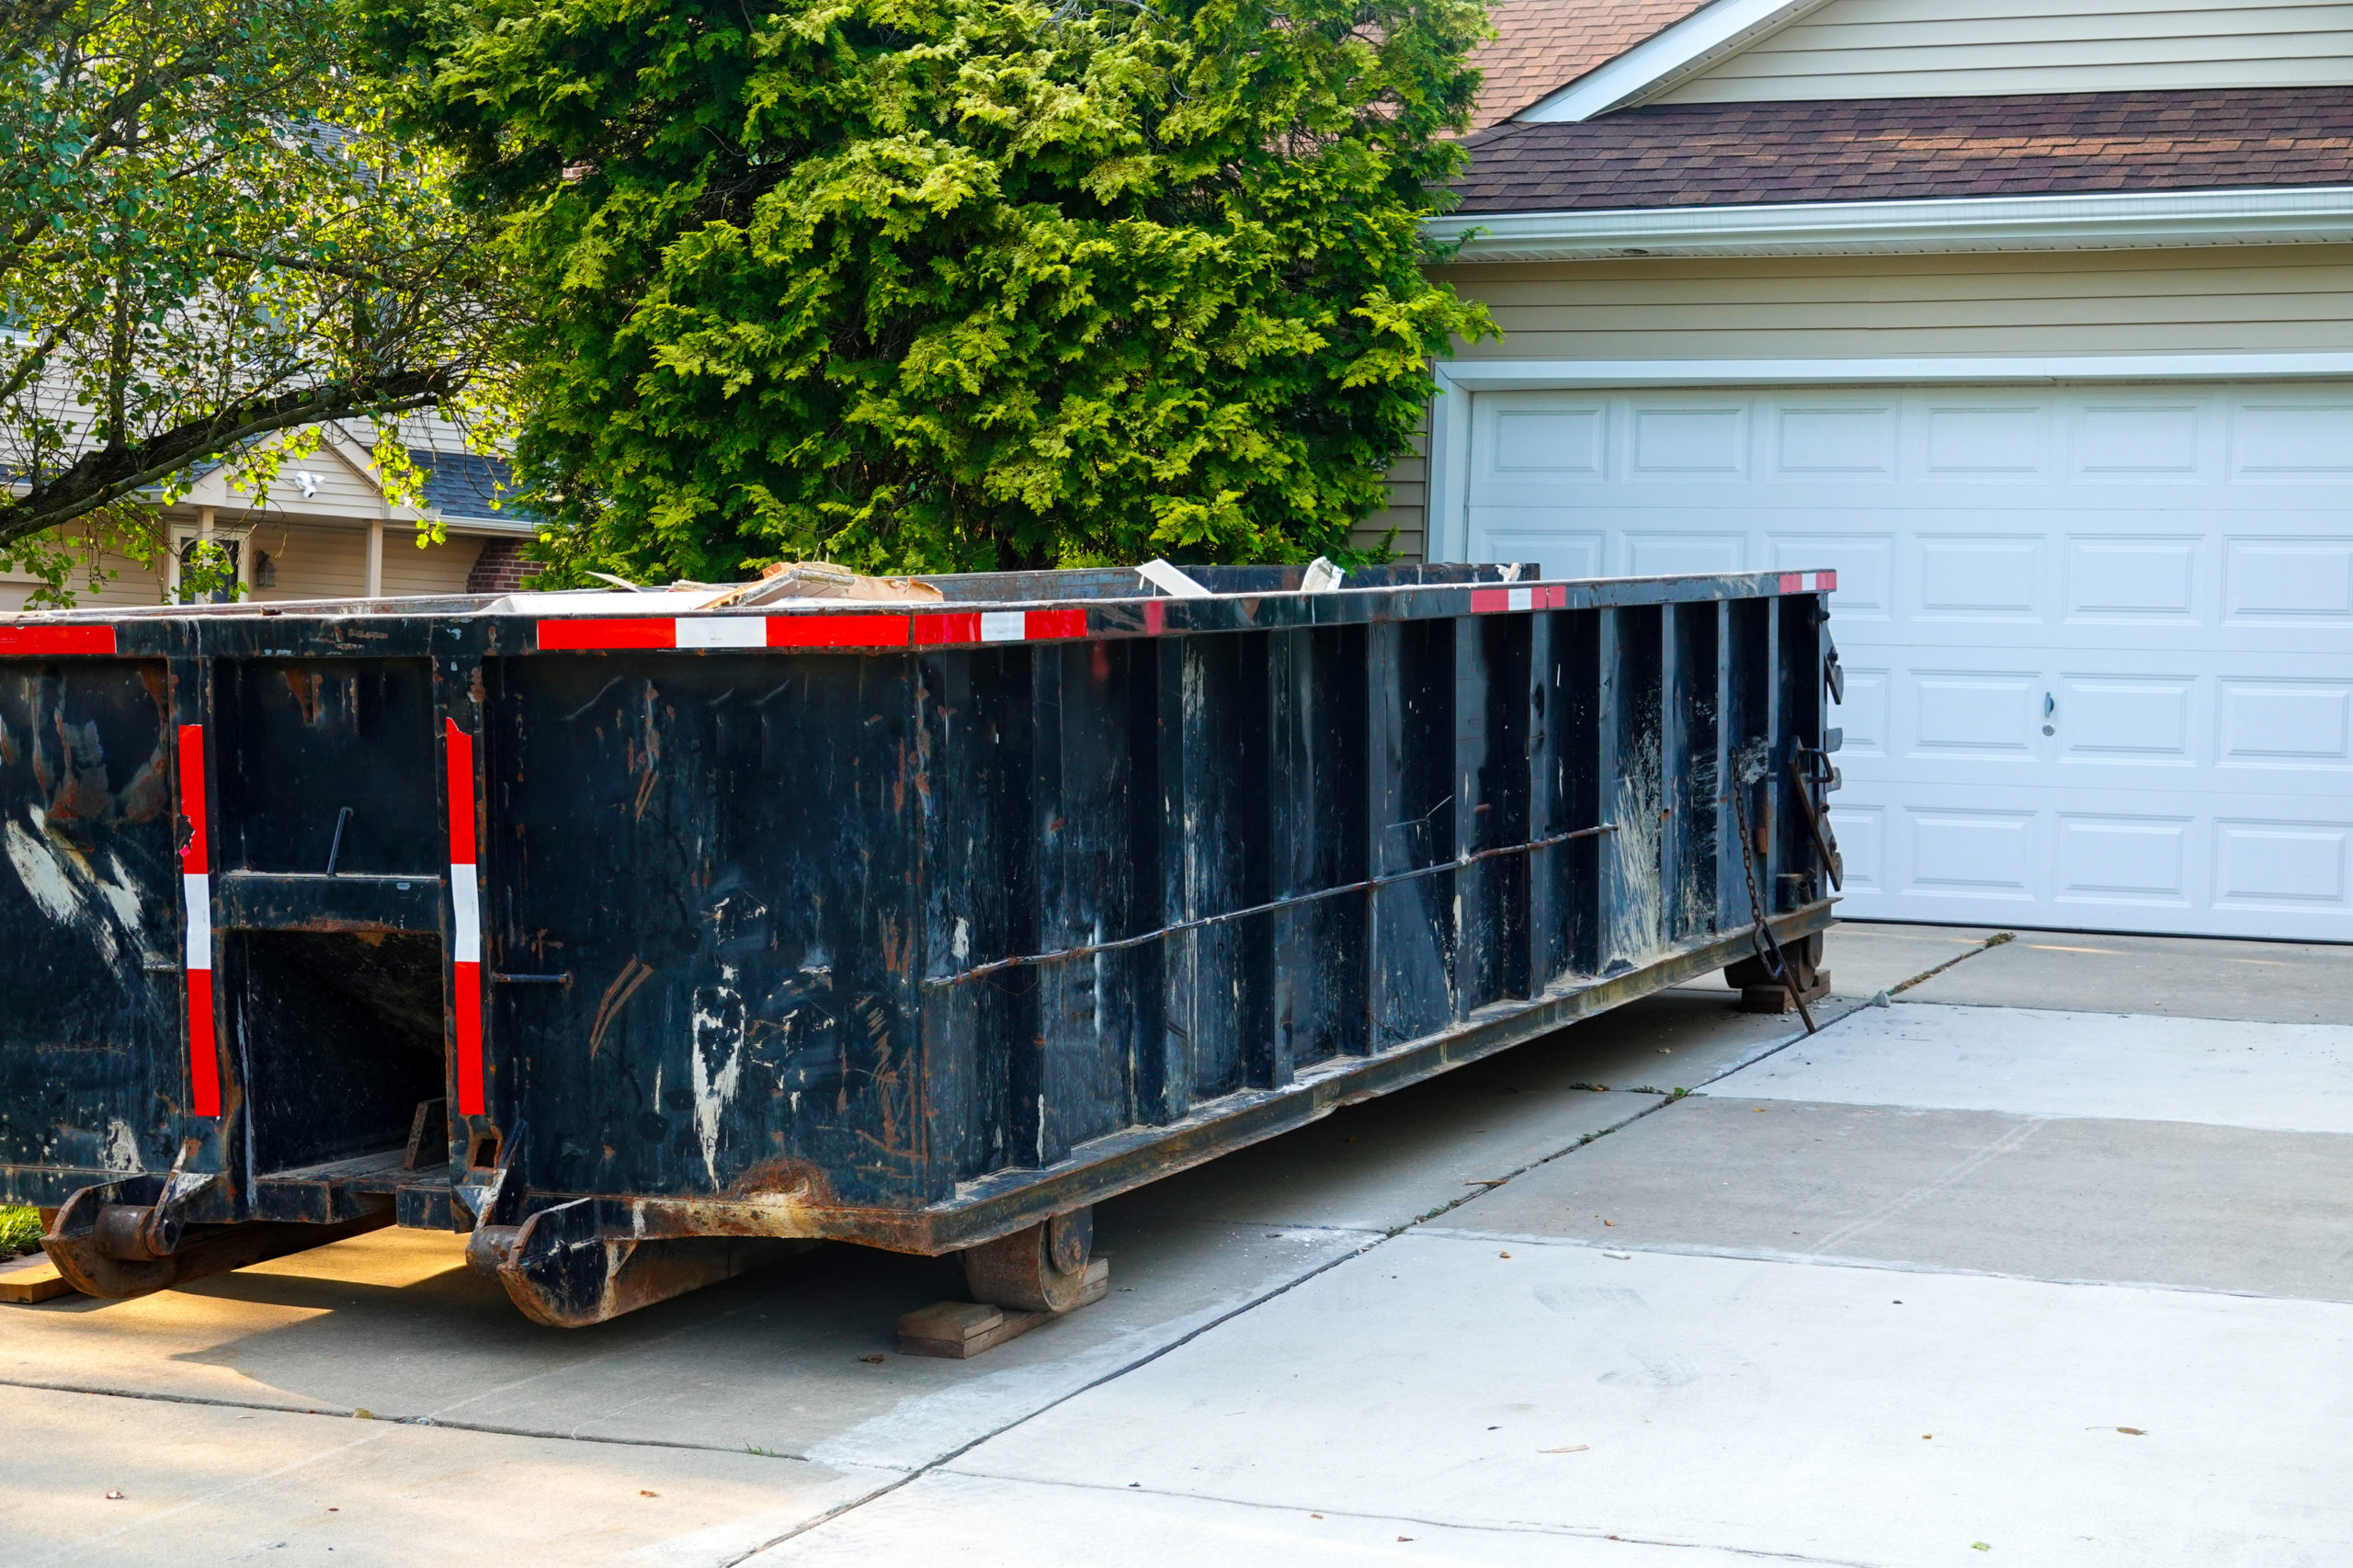 Dumpster Rentals For Property Managers And Real Estate